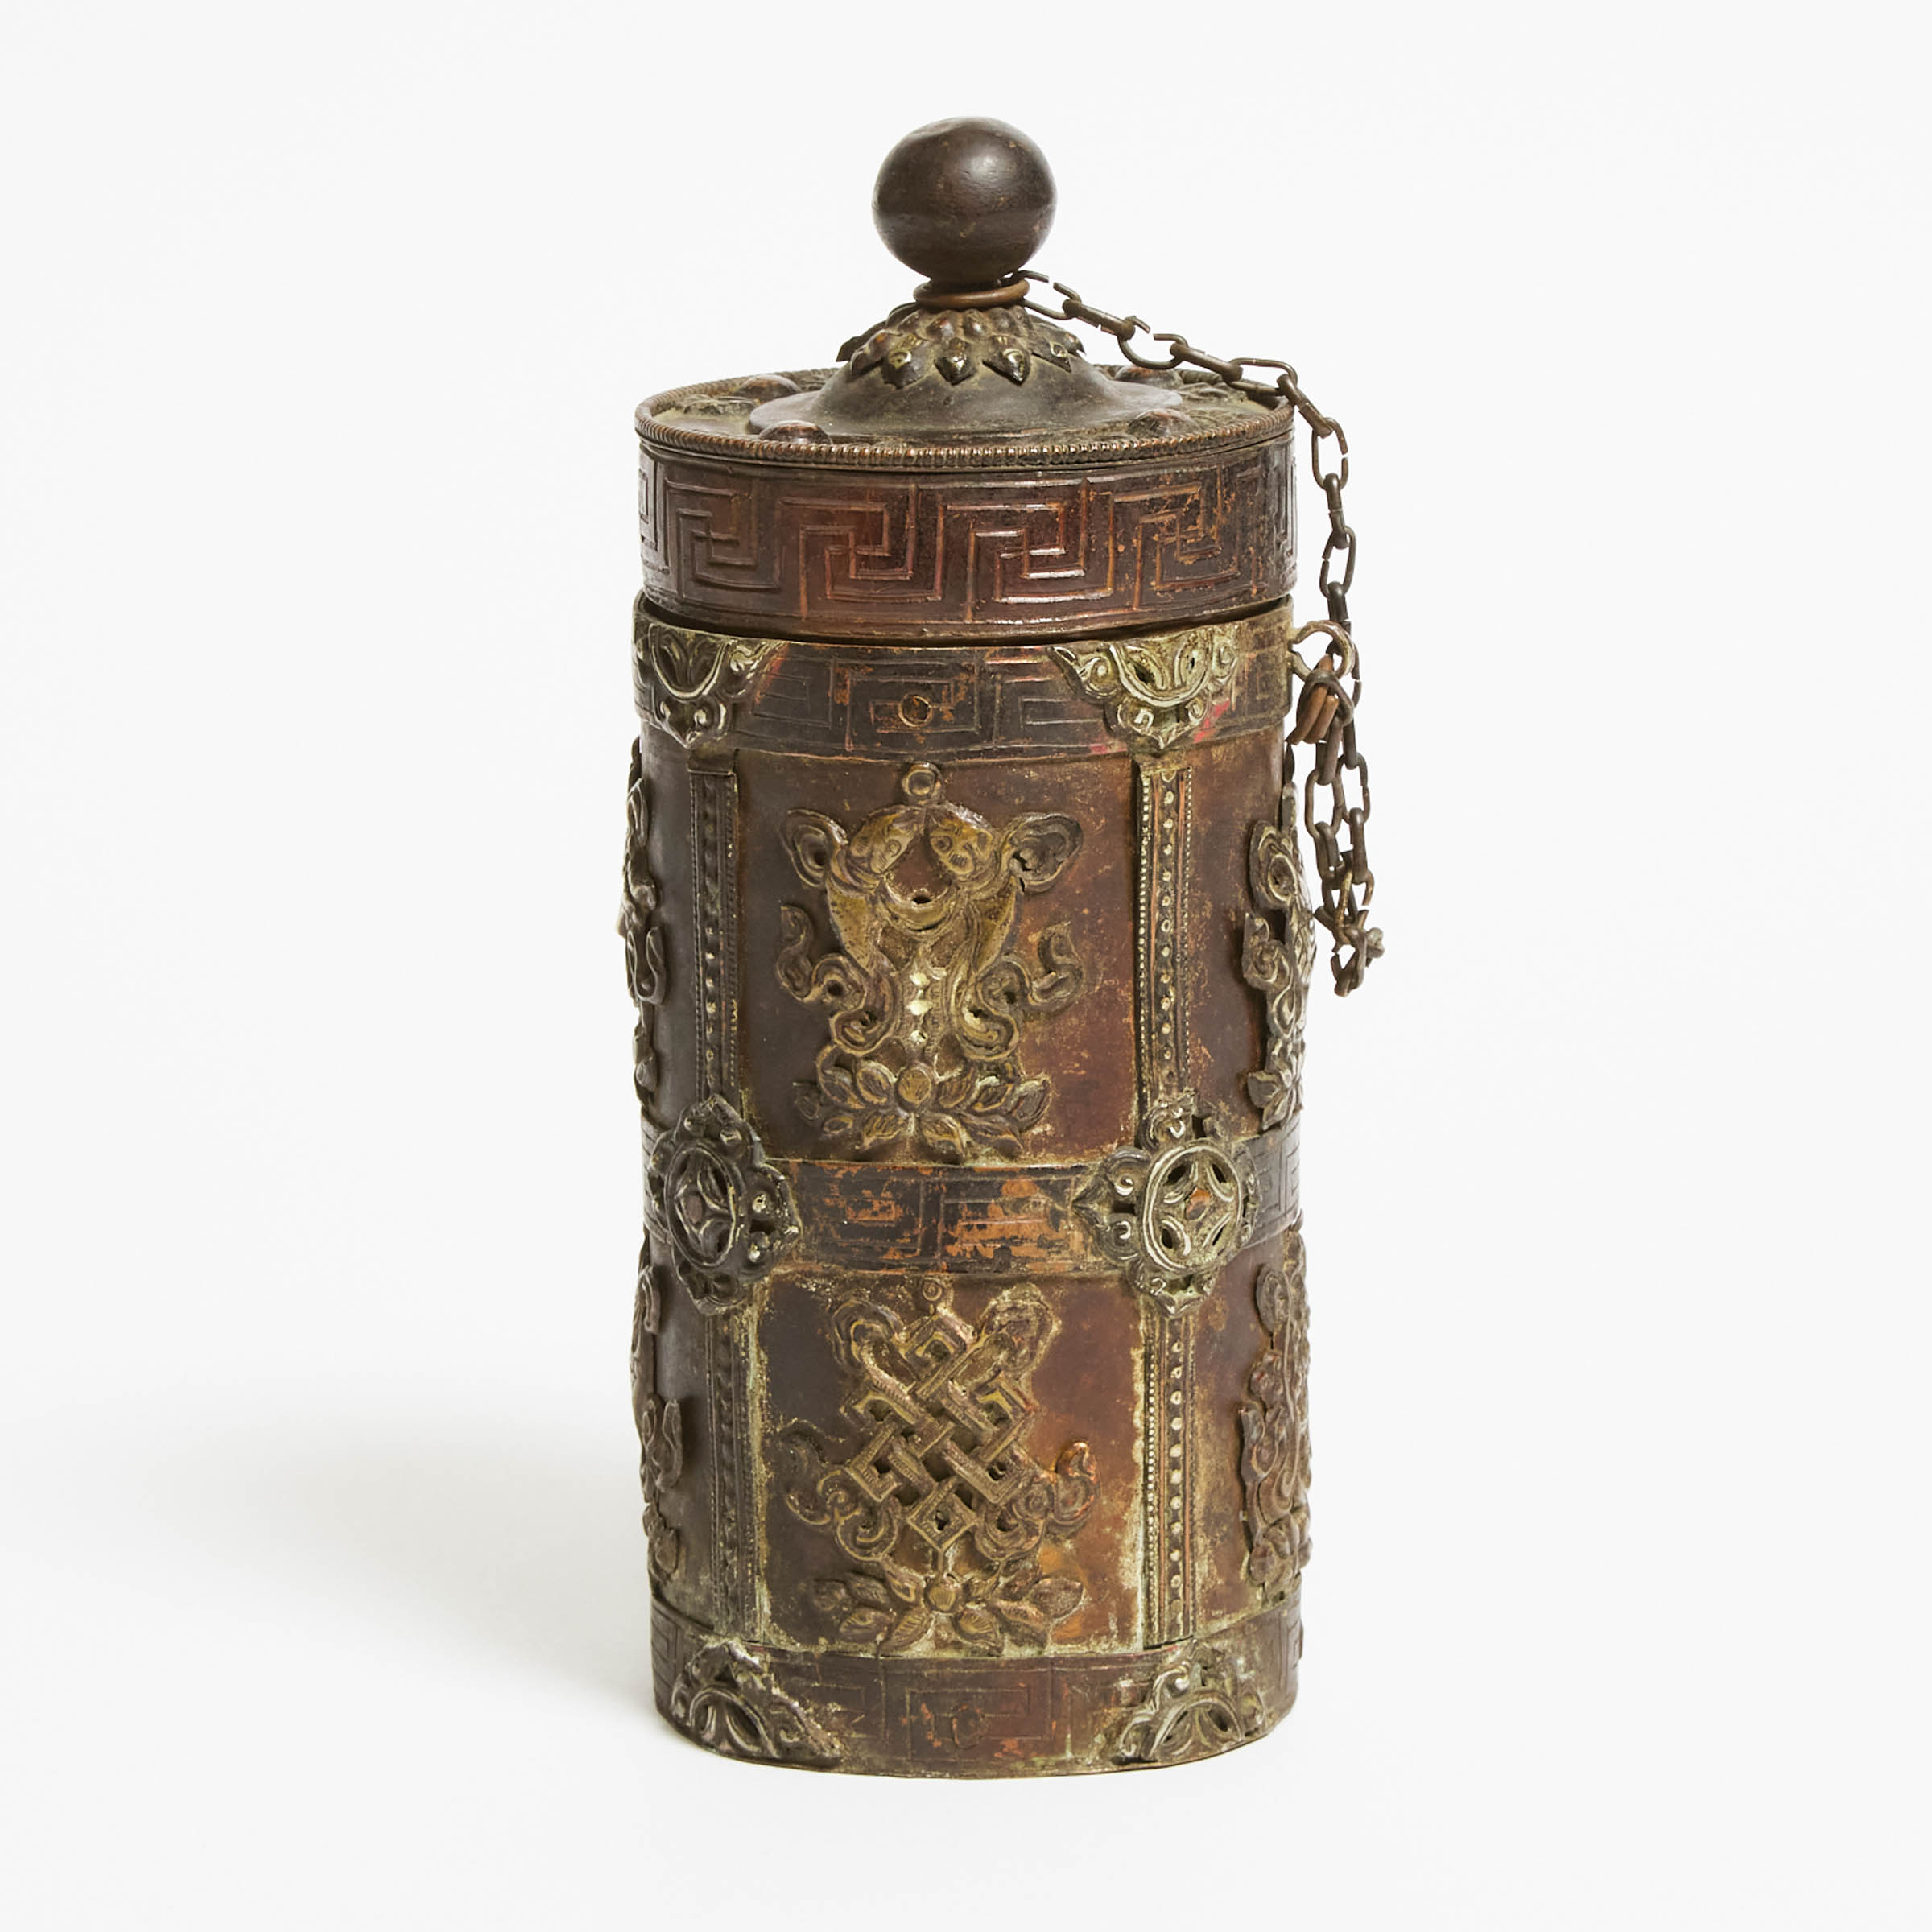 A Tibetan Cylindrical Vessel With Eight Silver 'Buddhist Emblems' Appliqués, 19th Century